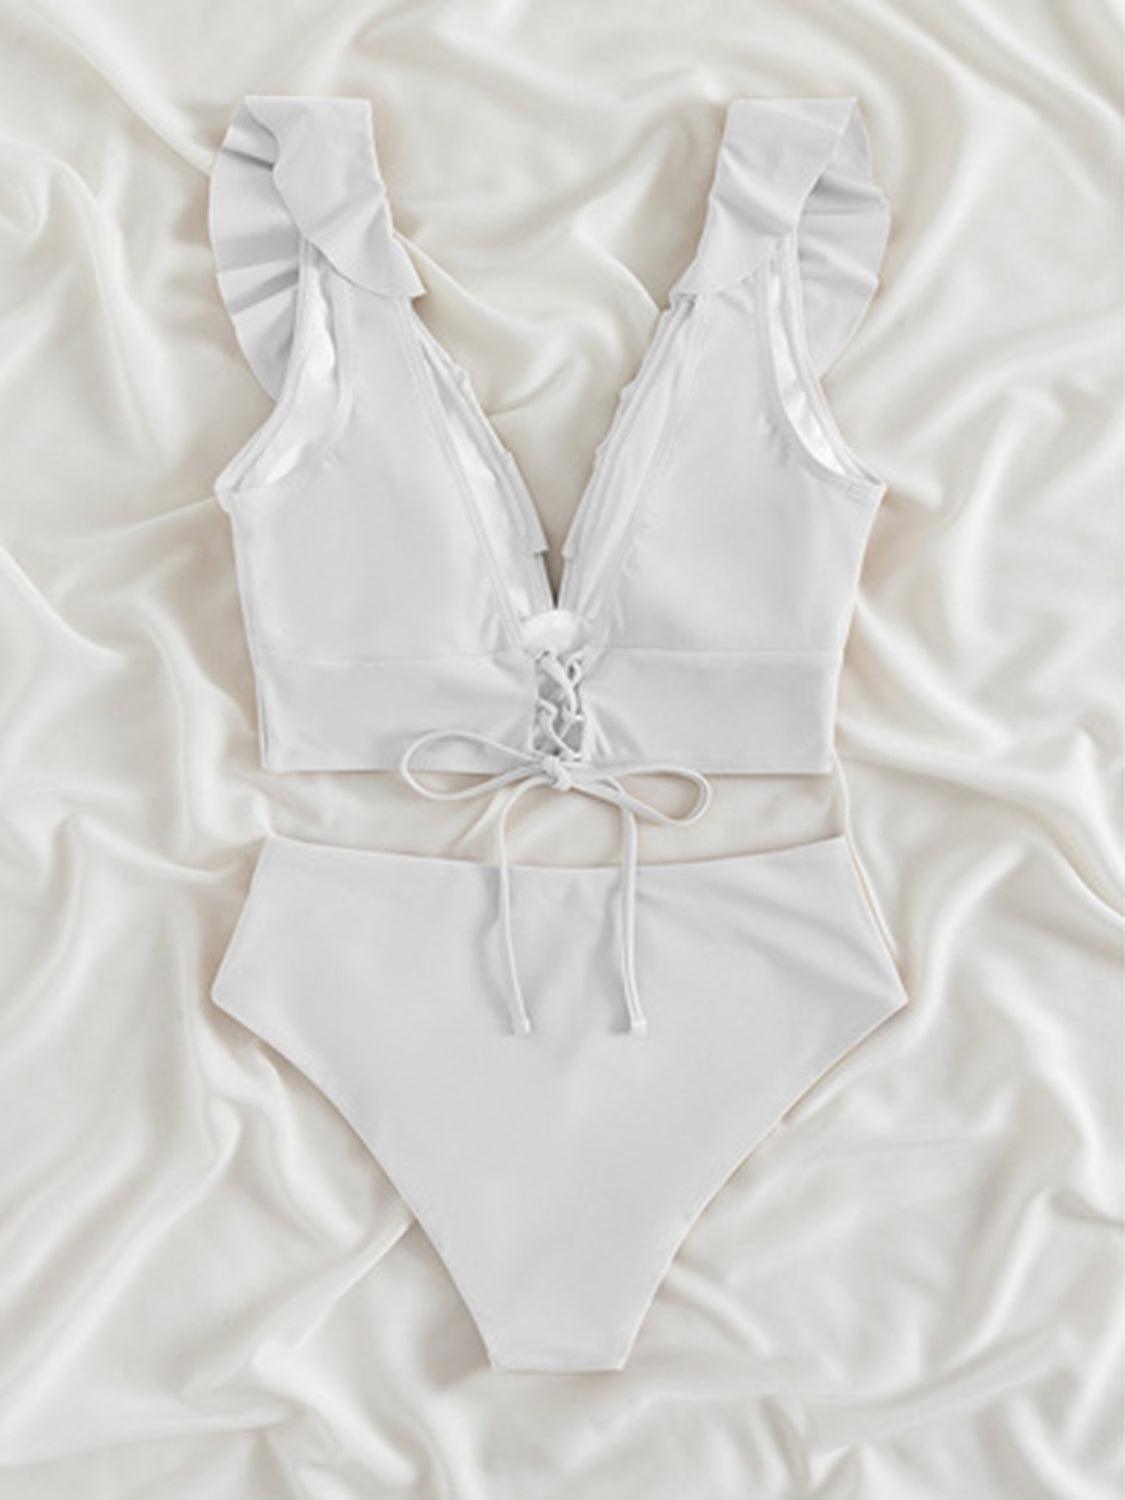 a white bikinisuit with a bow on the side